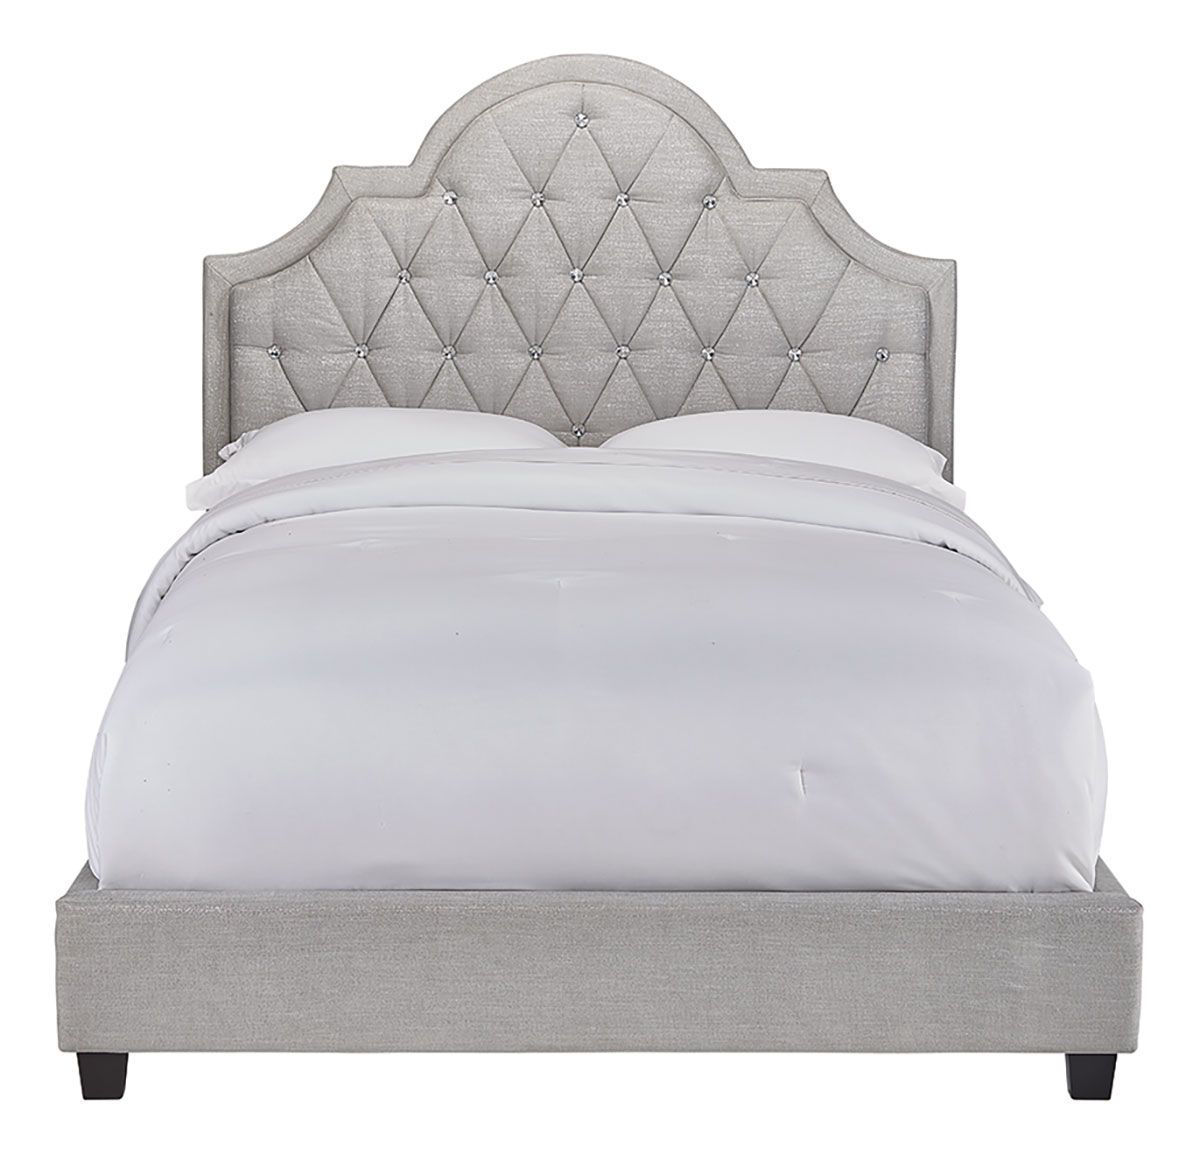 Belle Complete Twin Bed Bad Home, Grey Twin Bed